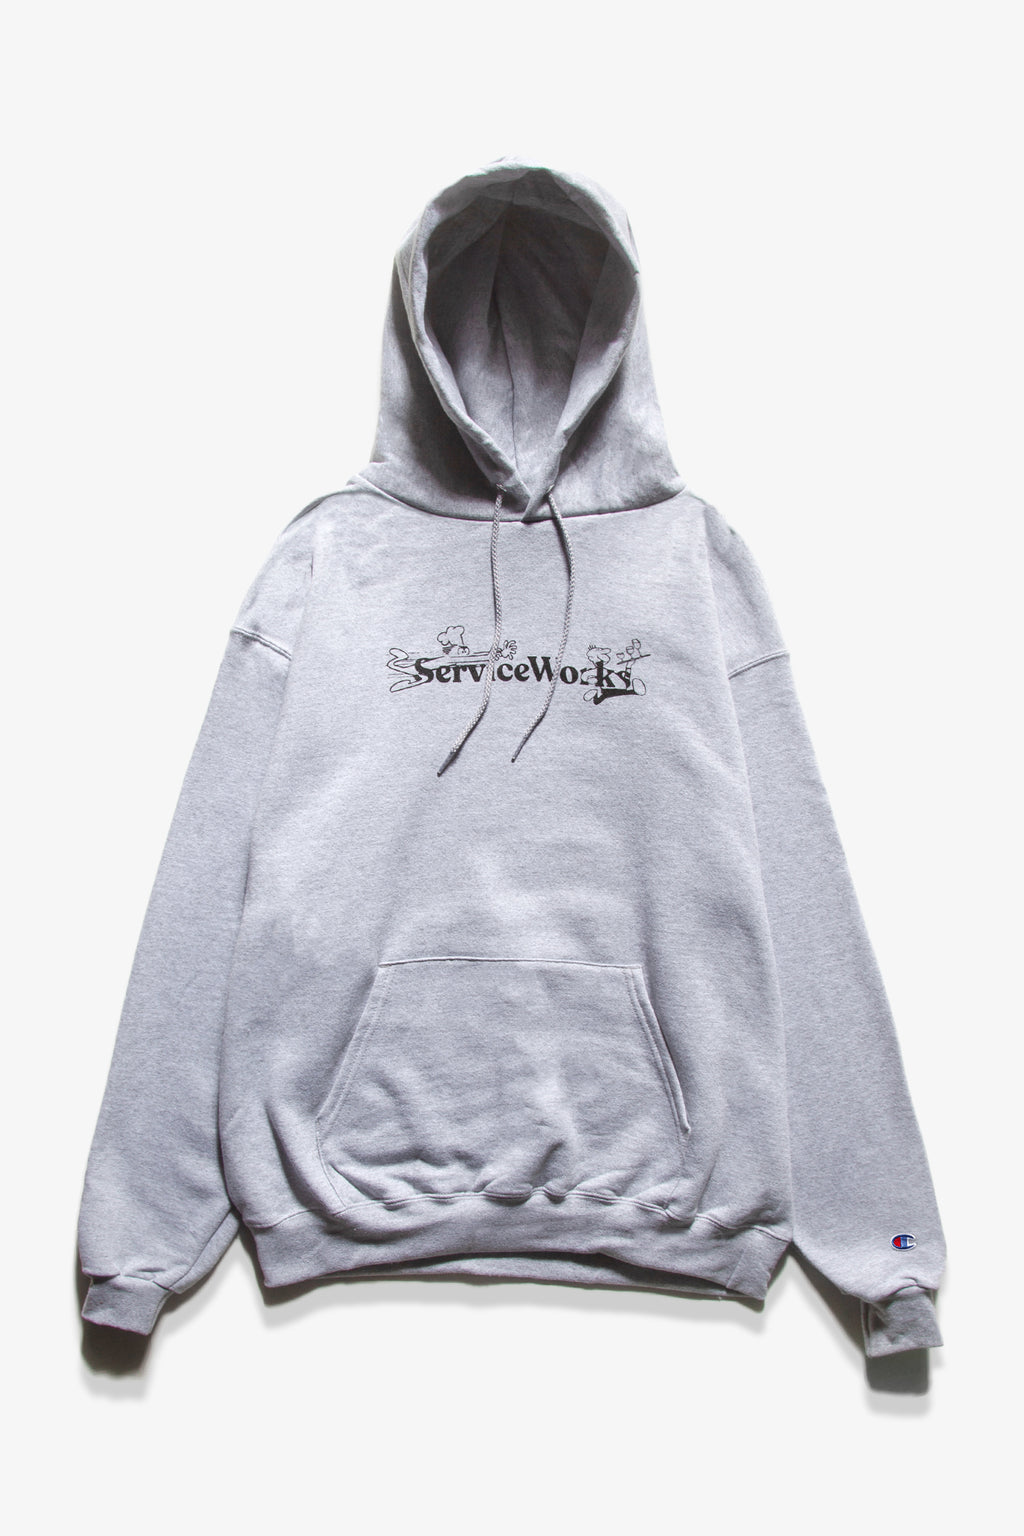 Service Works - Chase Hoodie - Heather Grey